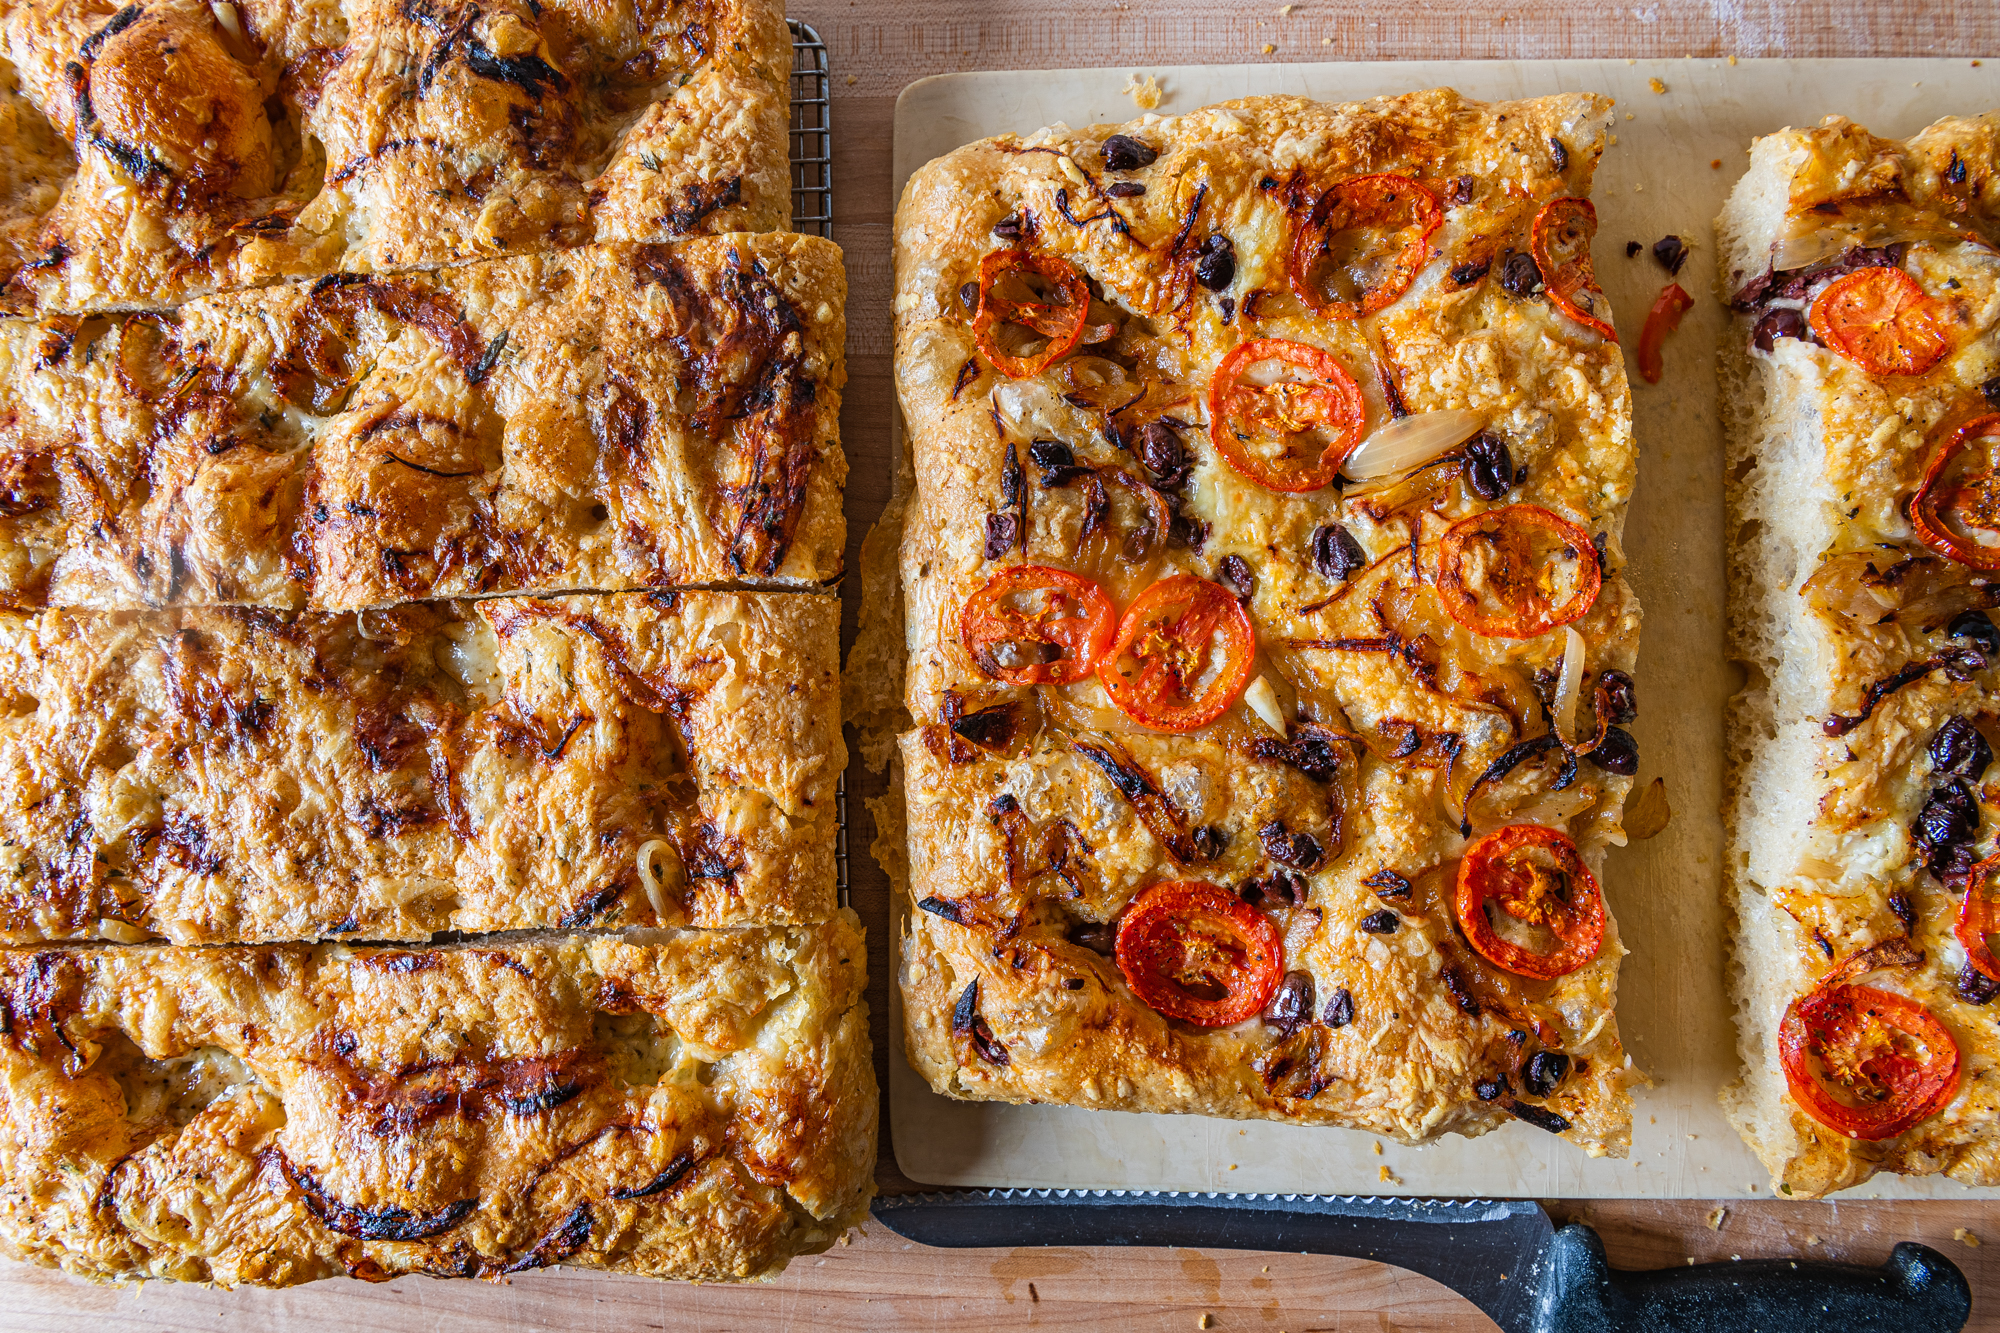 Two sheets of focaccia from Piccolina, covered in tomatoes and onions, respectively